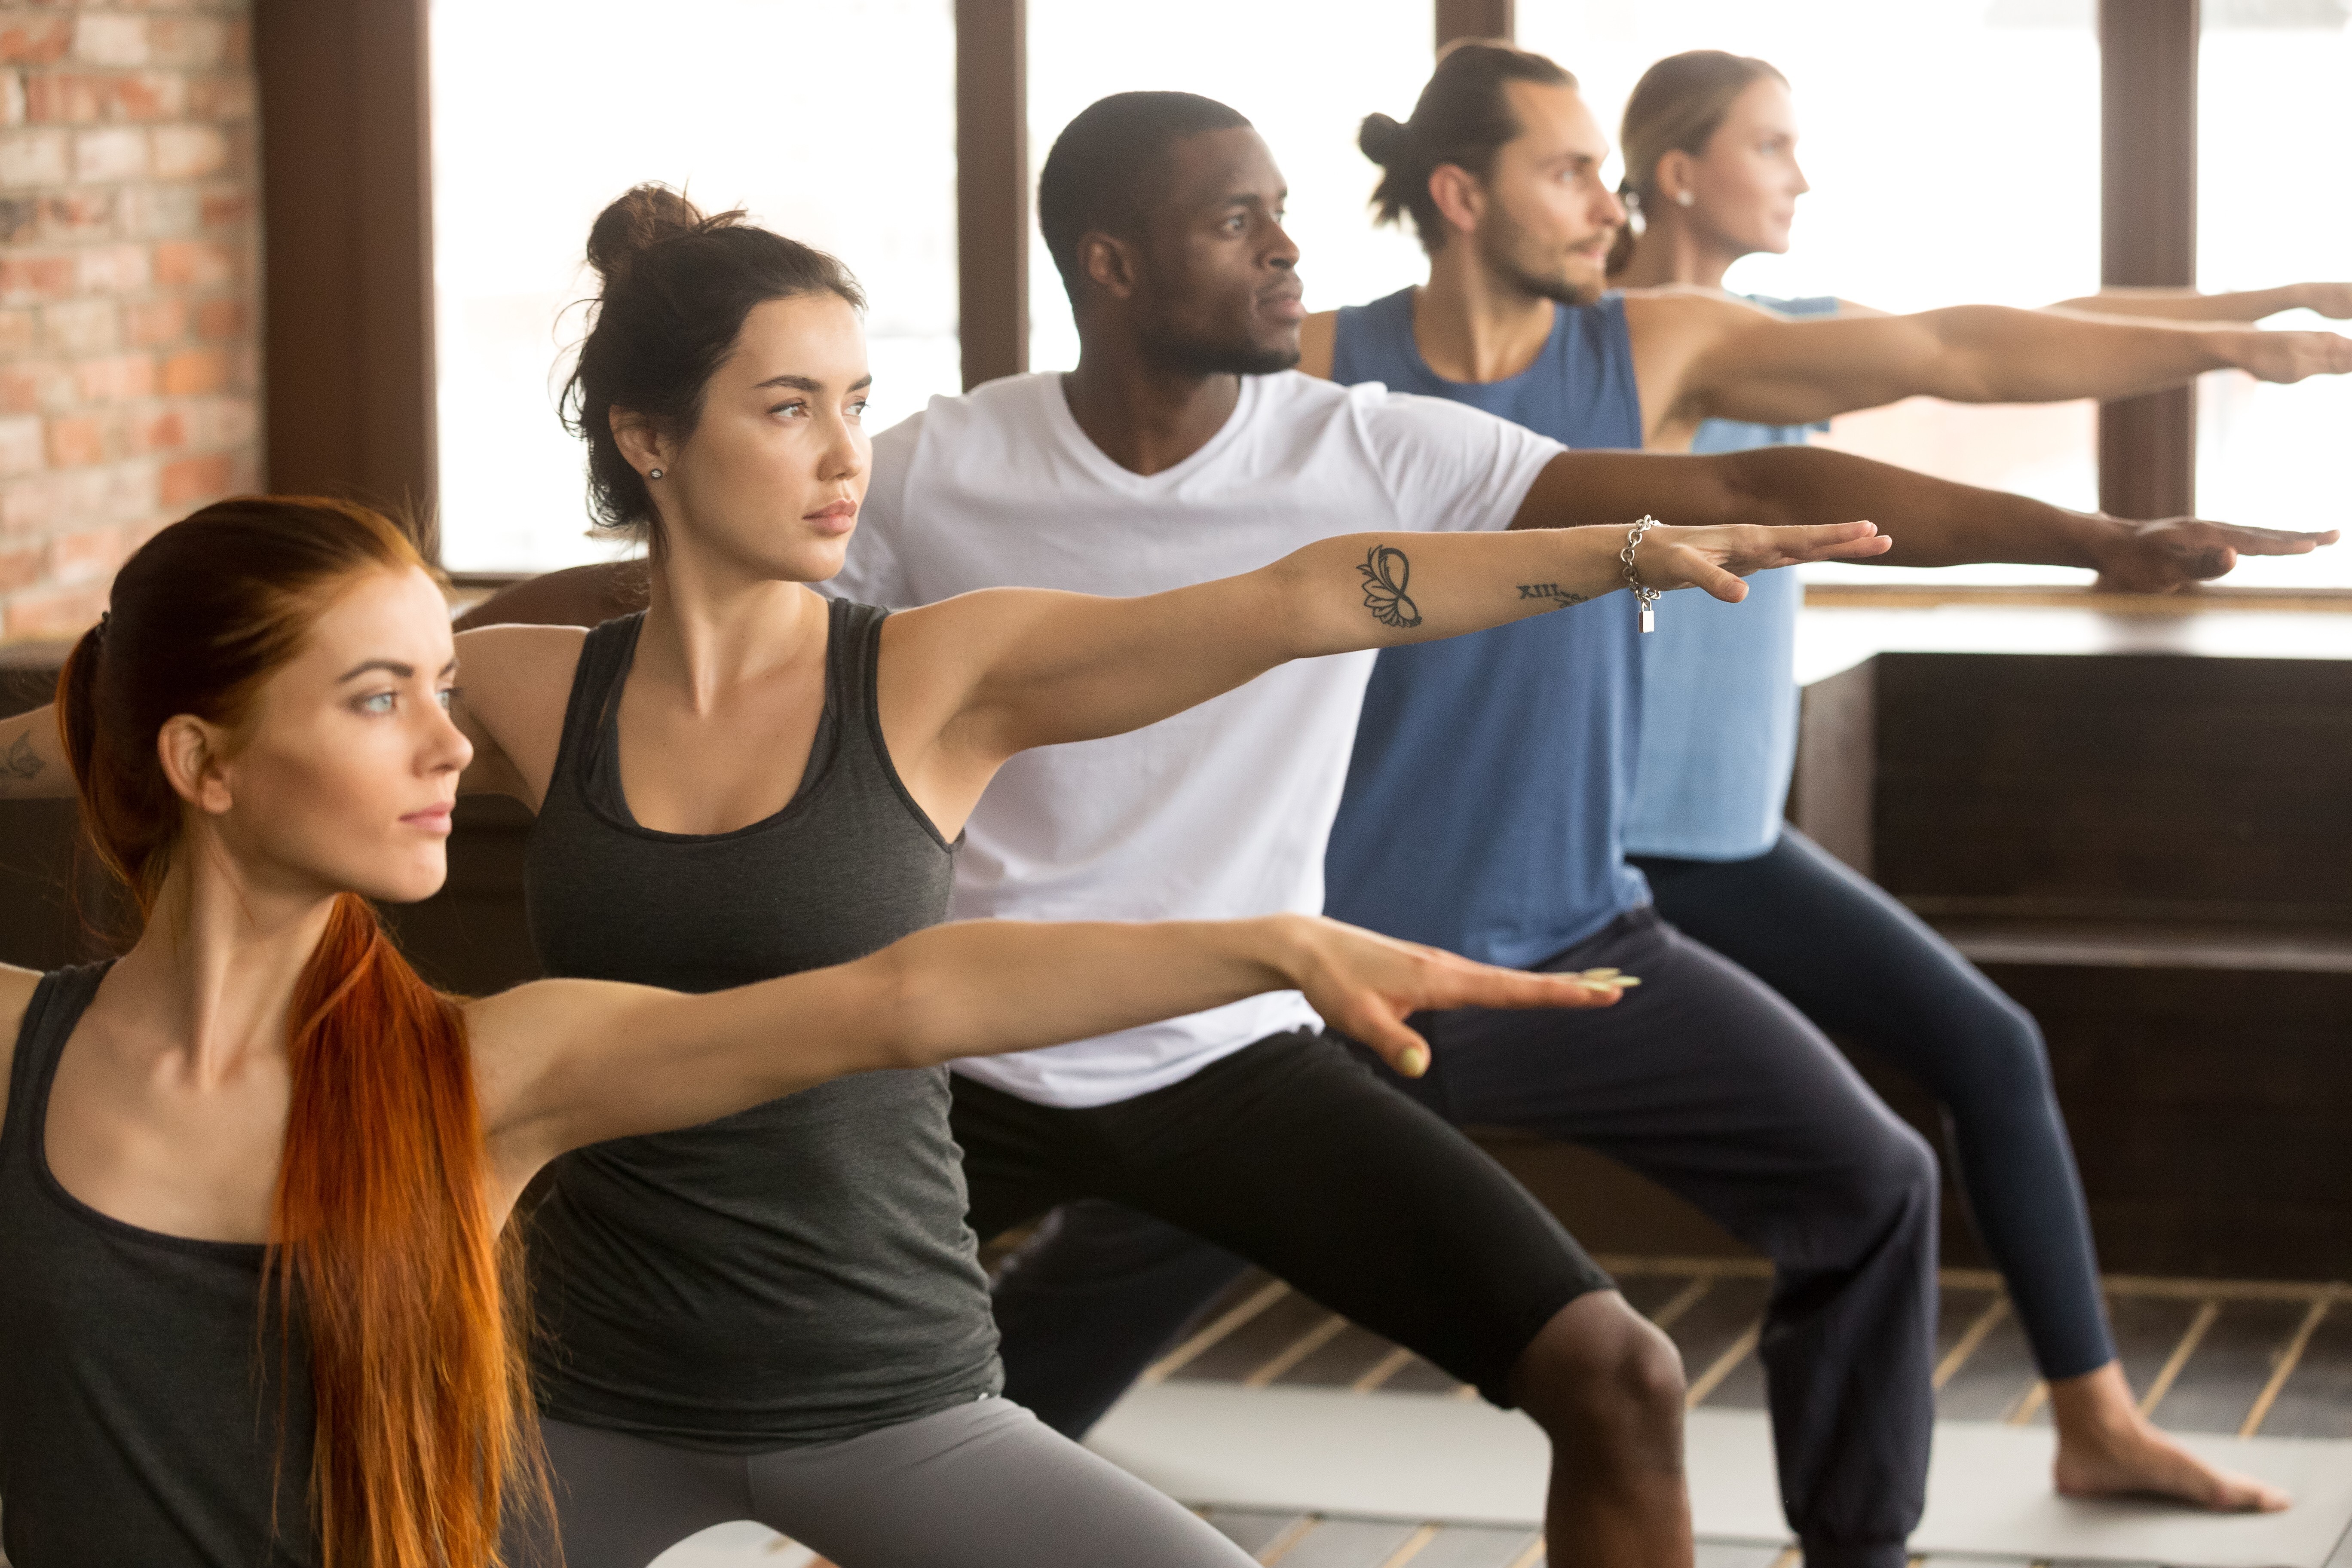 Yoga can provide a lot of physical and mental health benefits, and it's super easy to get started.